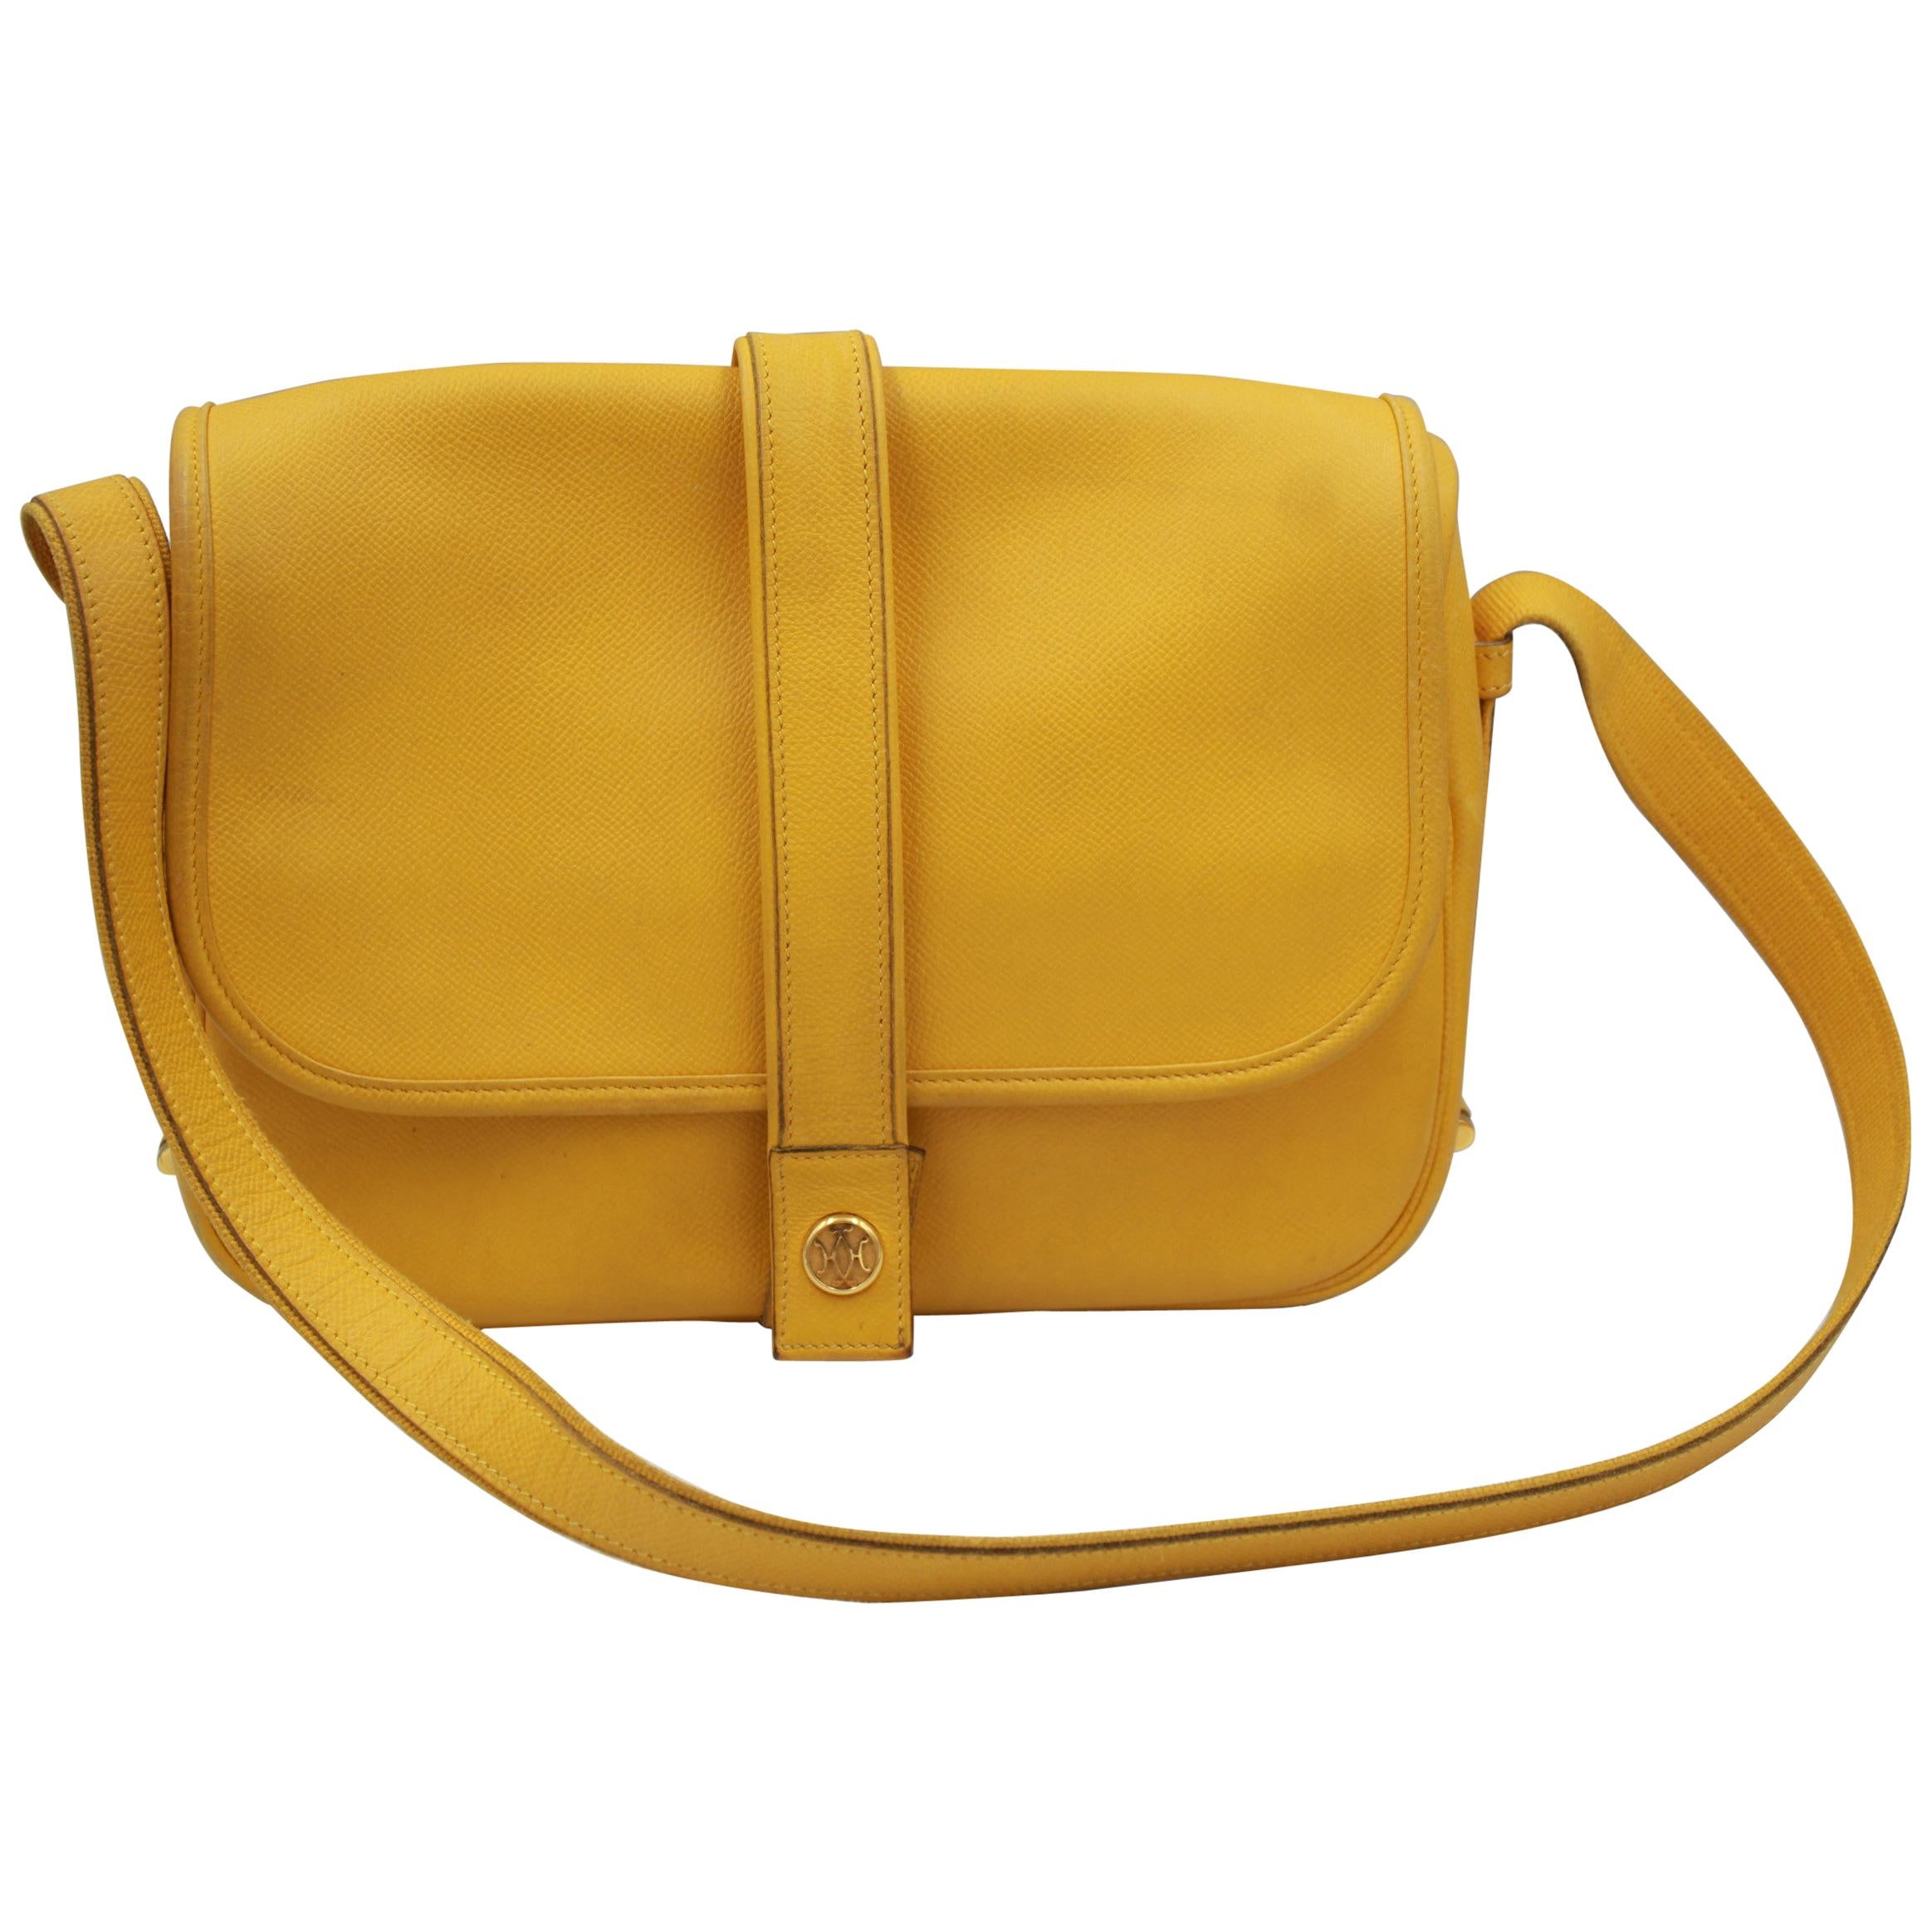 Vintage Hermes Noumea Messeger Bag in Yellow Leather For Sale